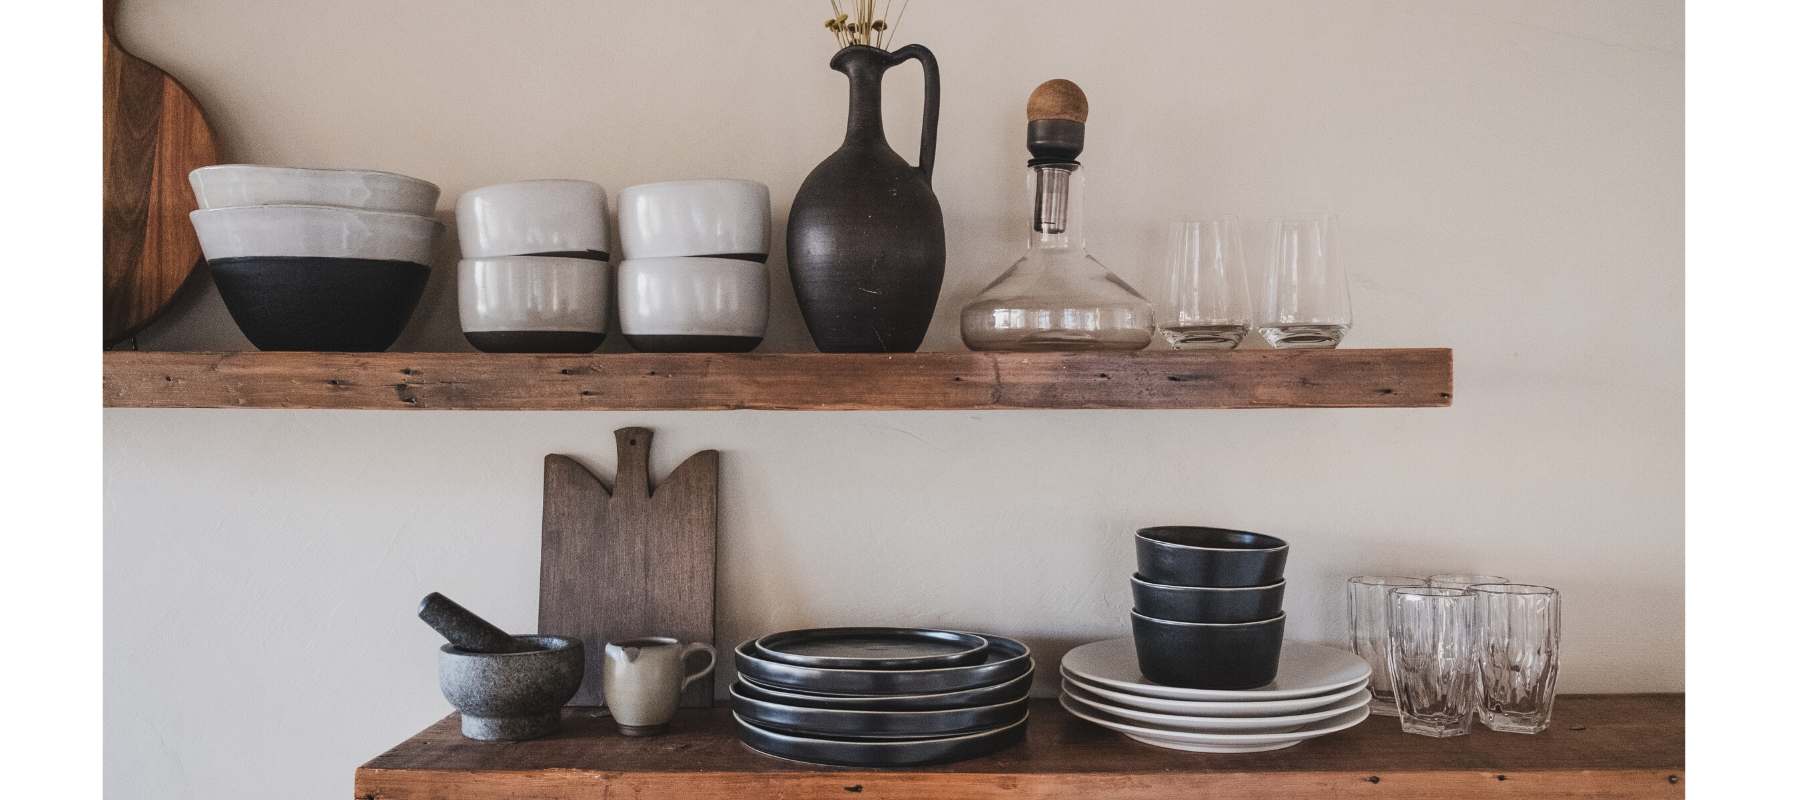 Rustic wooden kitchen shelves with pots and vases